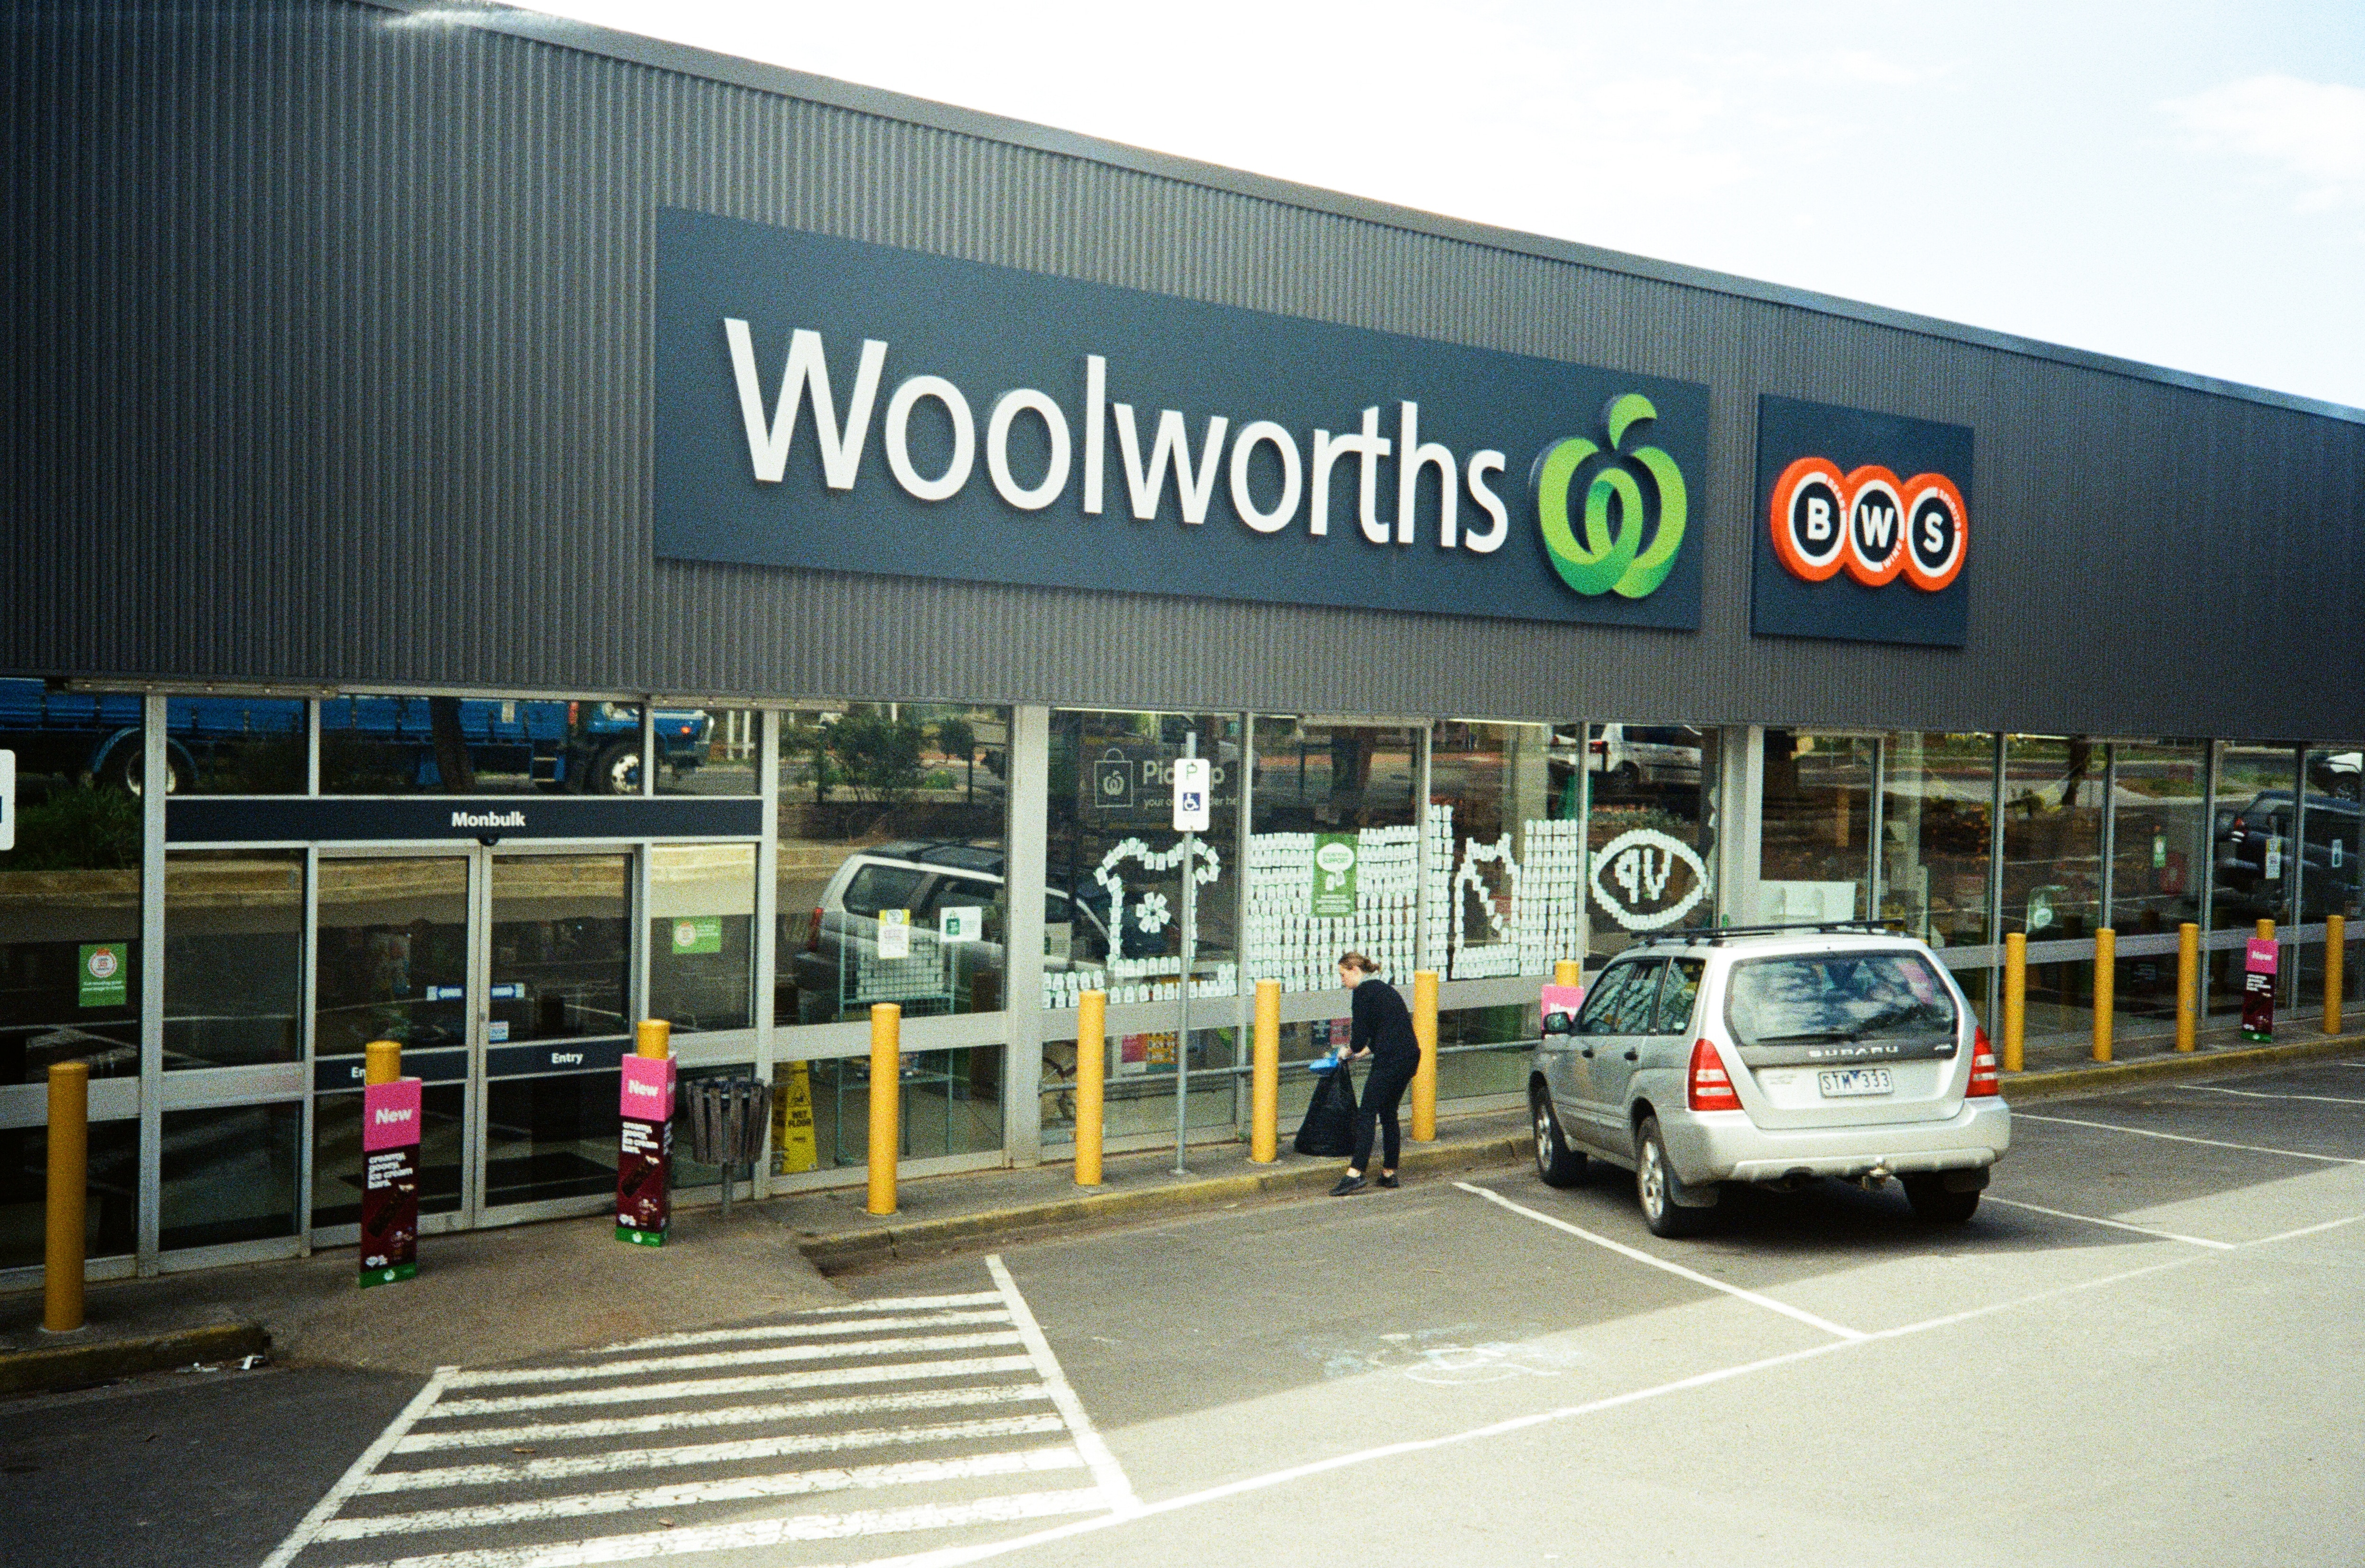 Woolworths says it underpaid 5,700 staff by as much as $300 million over nine years.